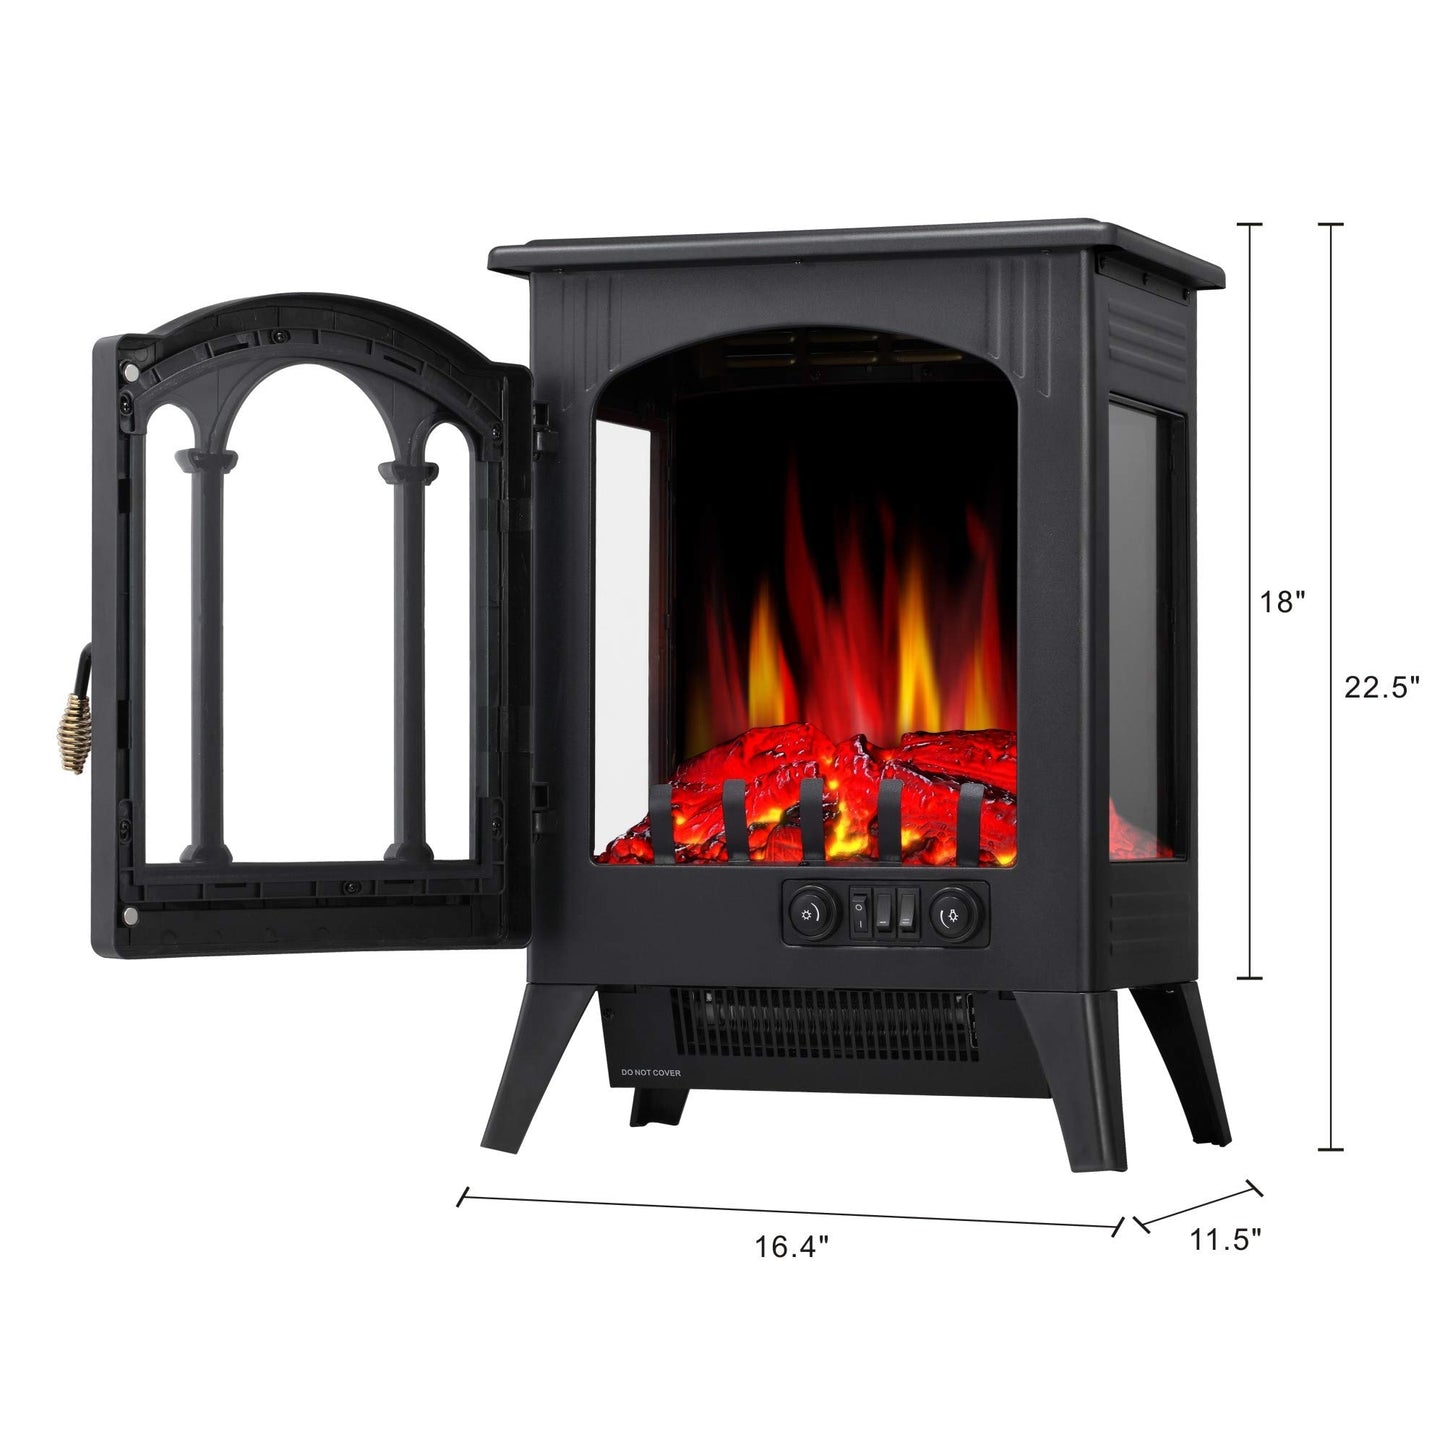 30 x 50 x 68 Electric Fireplace, in-Wall Recessed  Wall Mounted 1500W Heater Linear Timer,, Multicolor Flames, Touch Screen